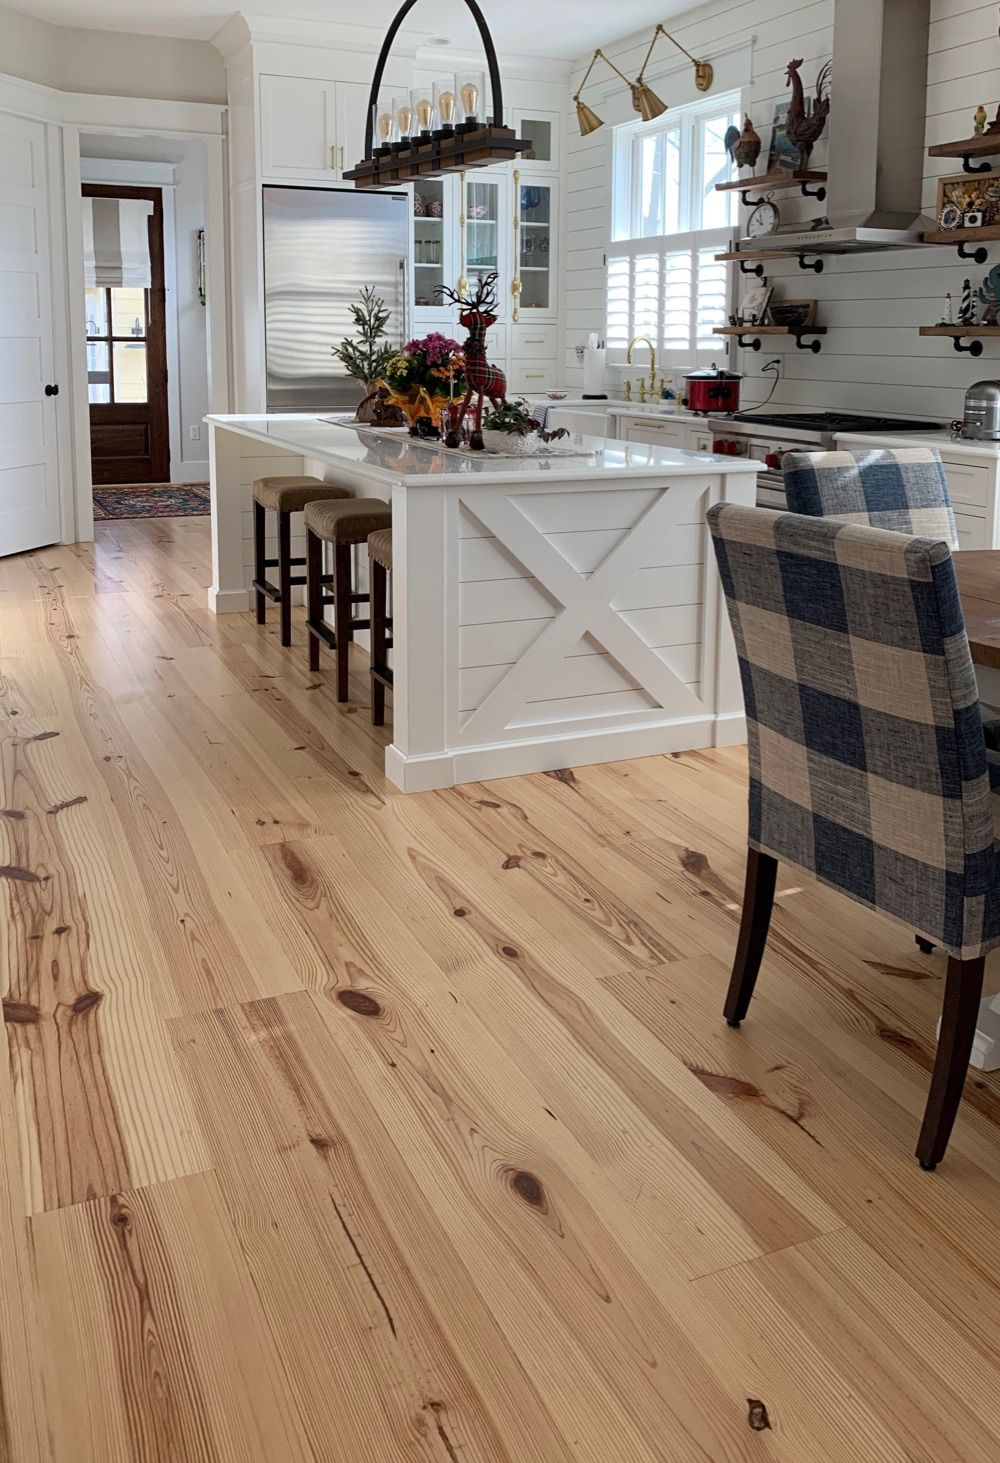 How to clean pine flooring?